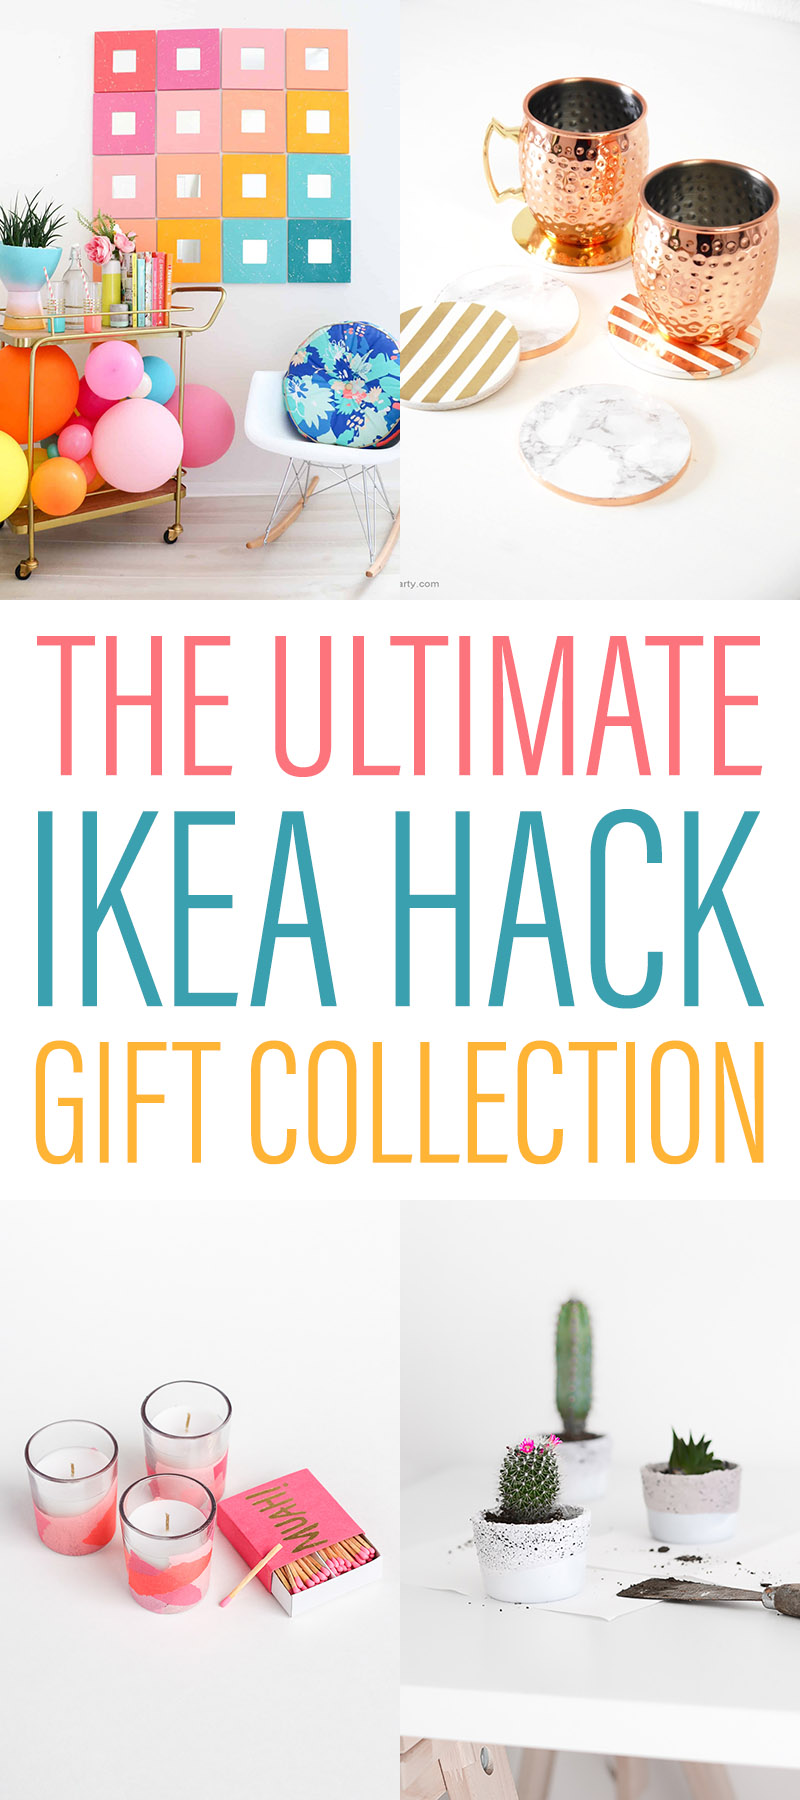 The Ultimate IKEA Hack Gift Collection is waiting for you! You will find a whole bunch of fabulous IKEA Hacks that make the perfect gift! Budget Friendsly!